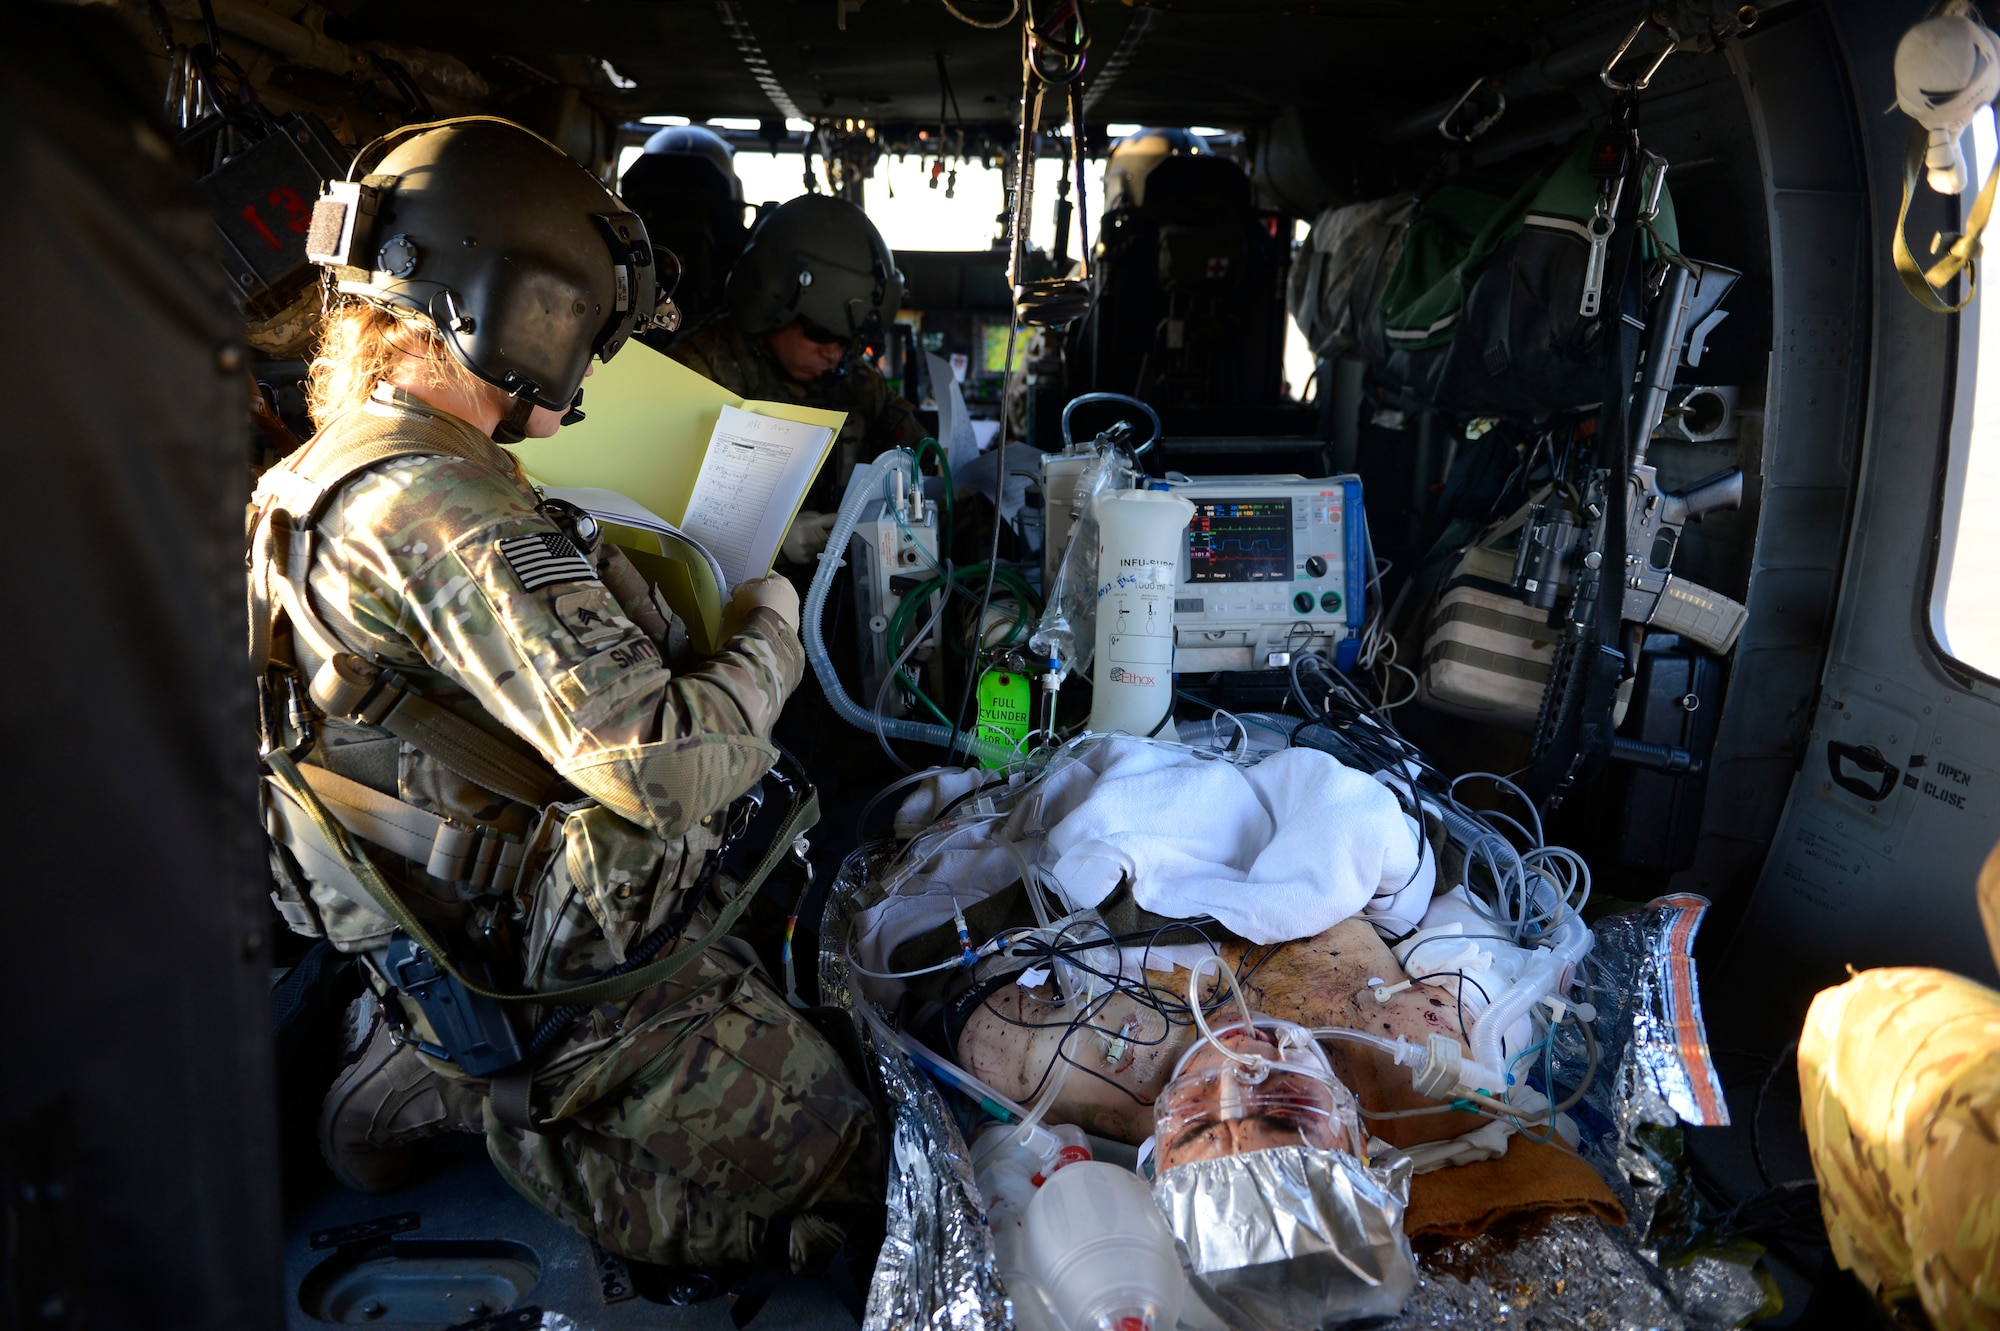 U.S. Army Sgt. Megan Smith, 159th Combat Aviation Brigade medic, reviews a patient's medical records during a patient transfer in Afghanistan, July 2014. Smith is a Devils Lake, North Dakota native deployed from Fort Campbell, Ky. Medevac typically flies with two aircraft and a team of four and may include a fifth with an en route care nurse. (U.S. Air Force photo by Senior Airman Sandra Welch)